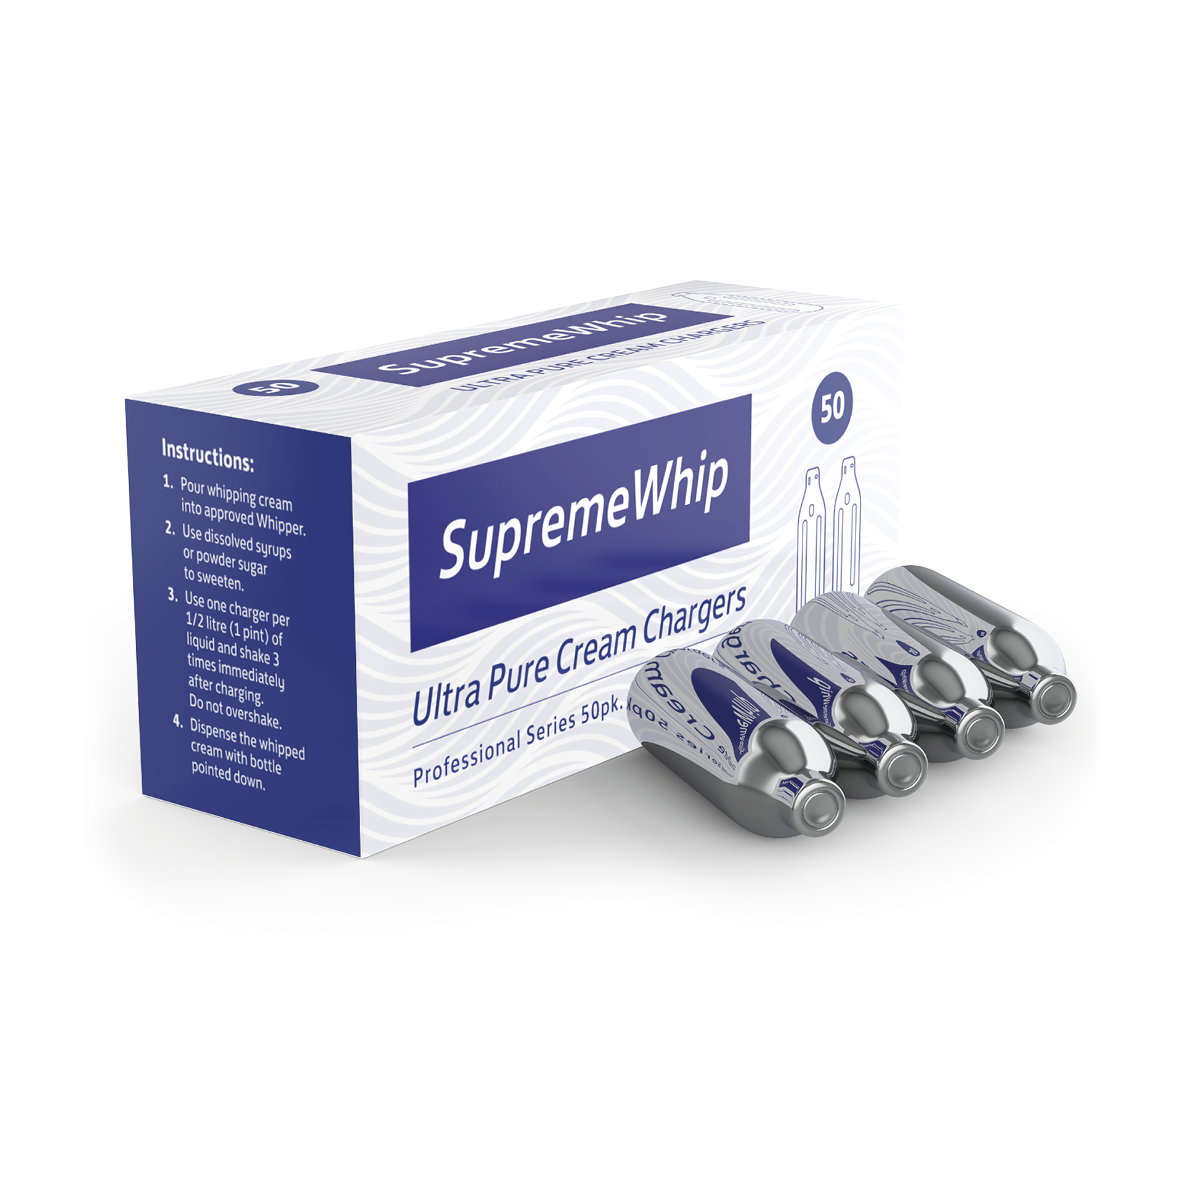 SupremeWhip Cream Chargers - 50 Pack